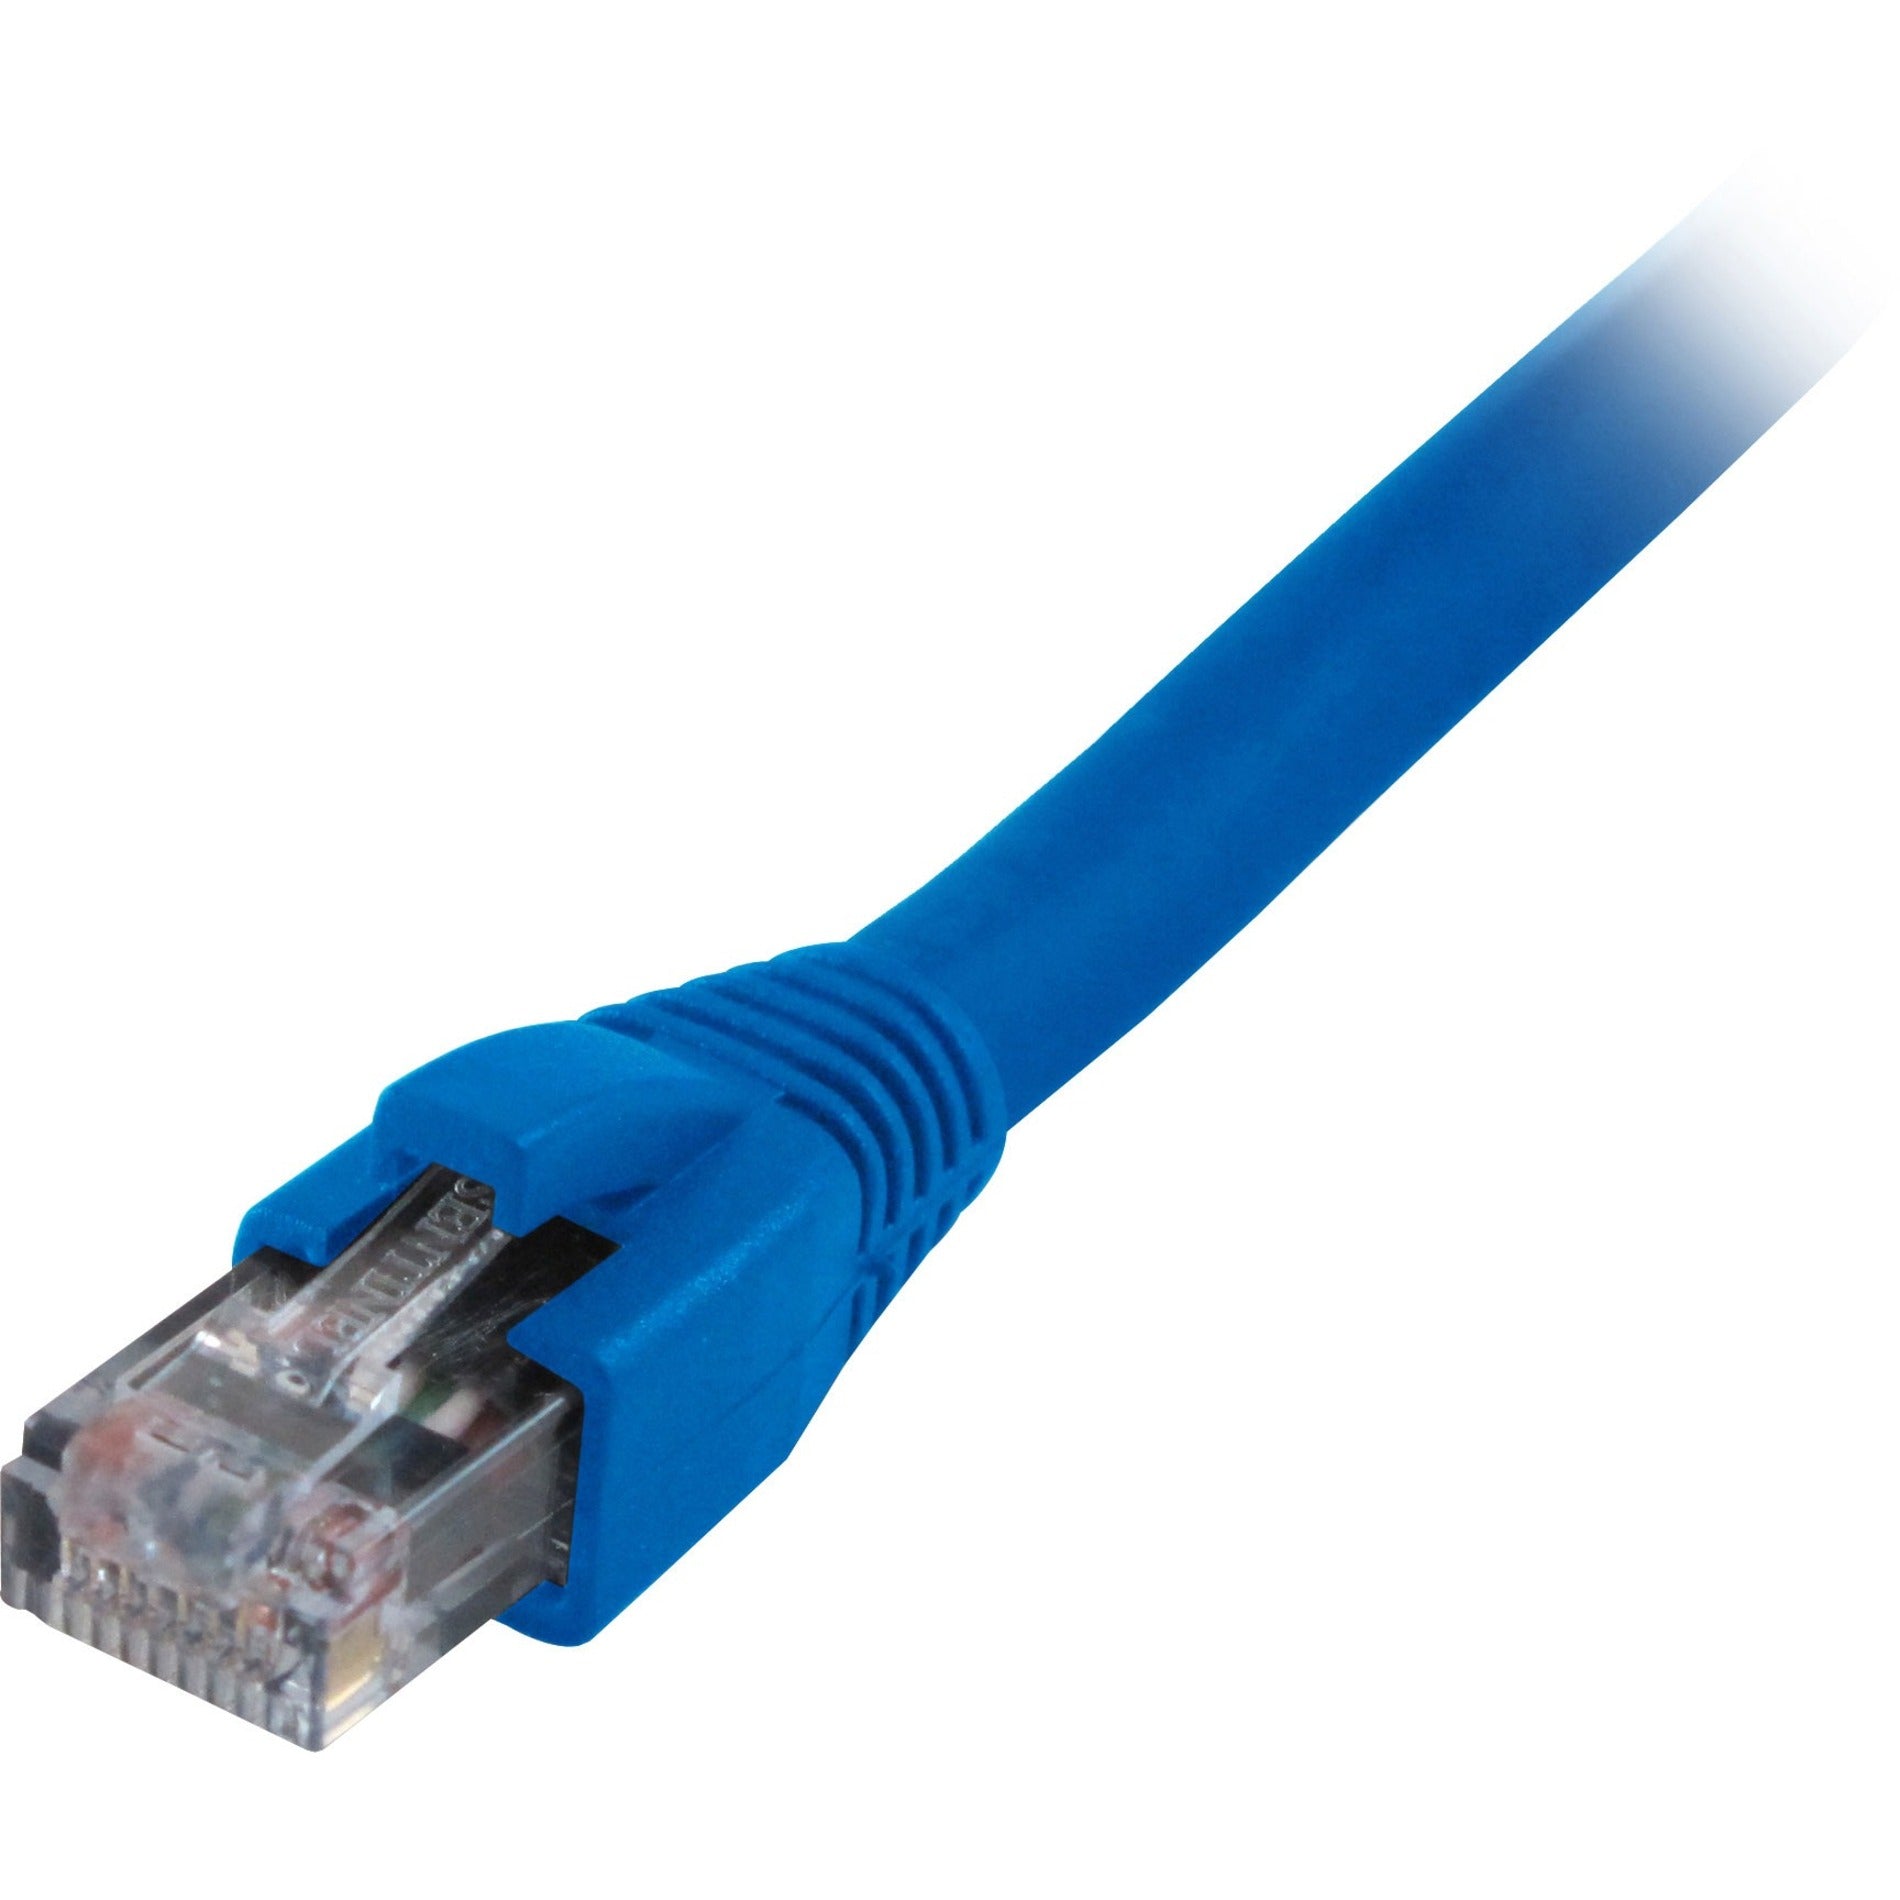 Comprehensive CAT6A-75BLU CAT6A Shielded Patch Cable Blue 75ft., 10 Gbit/s Data Transfer Rate, Snagless Boot, Lifetime Warranty